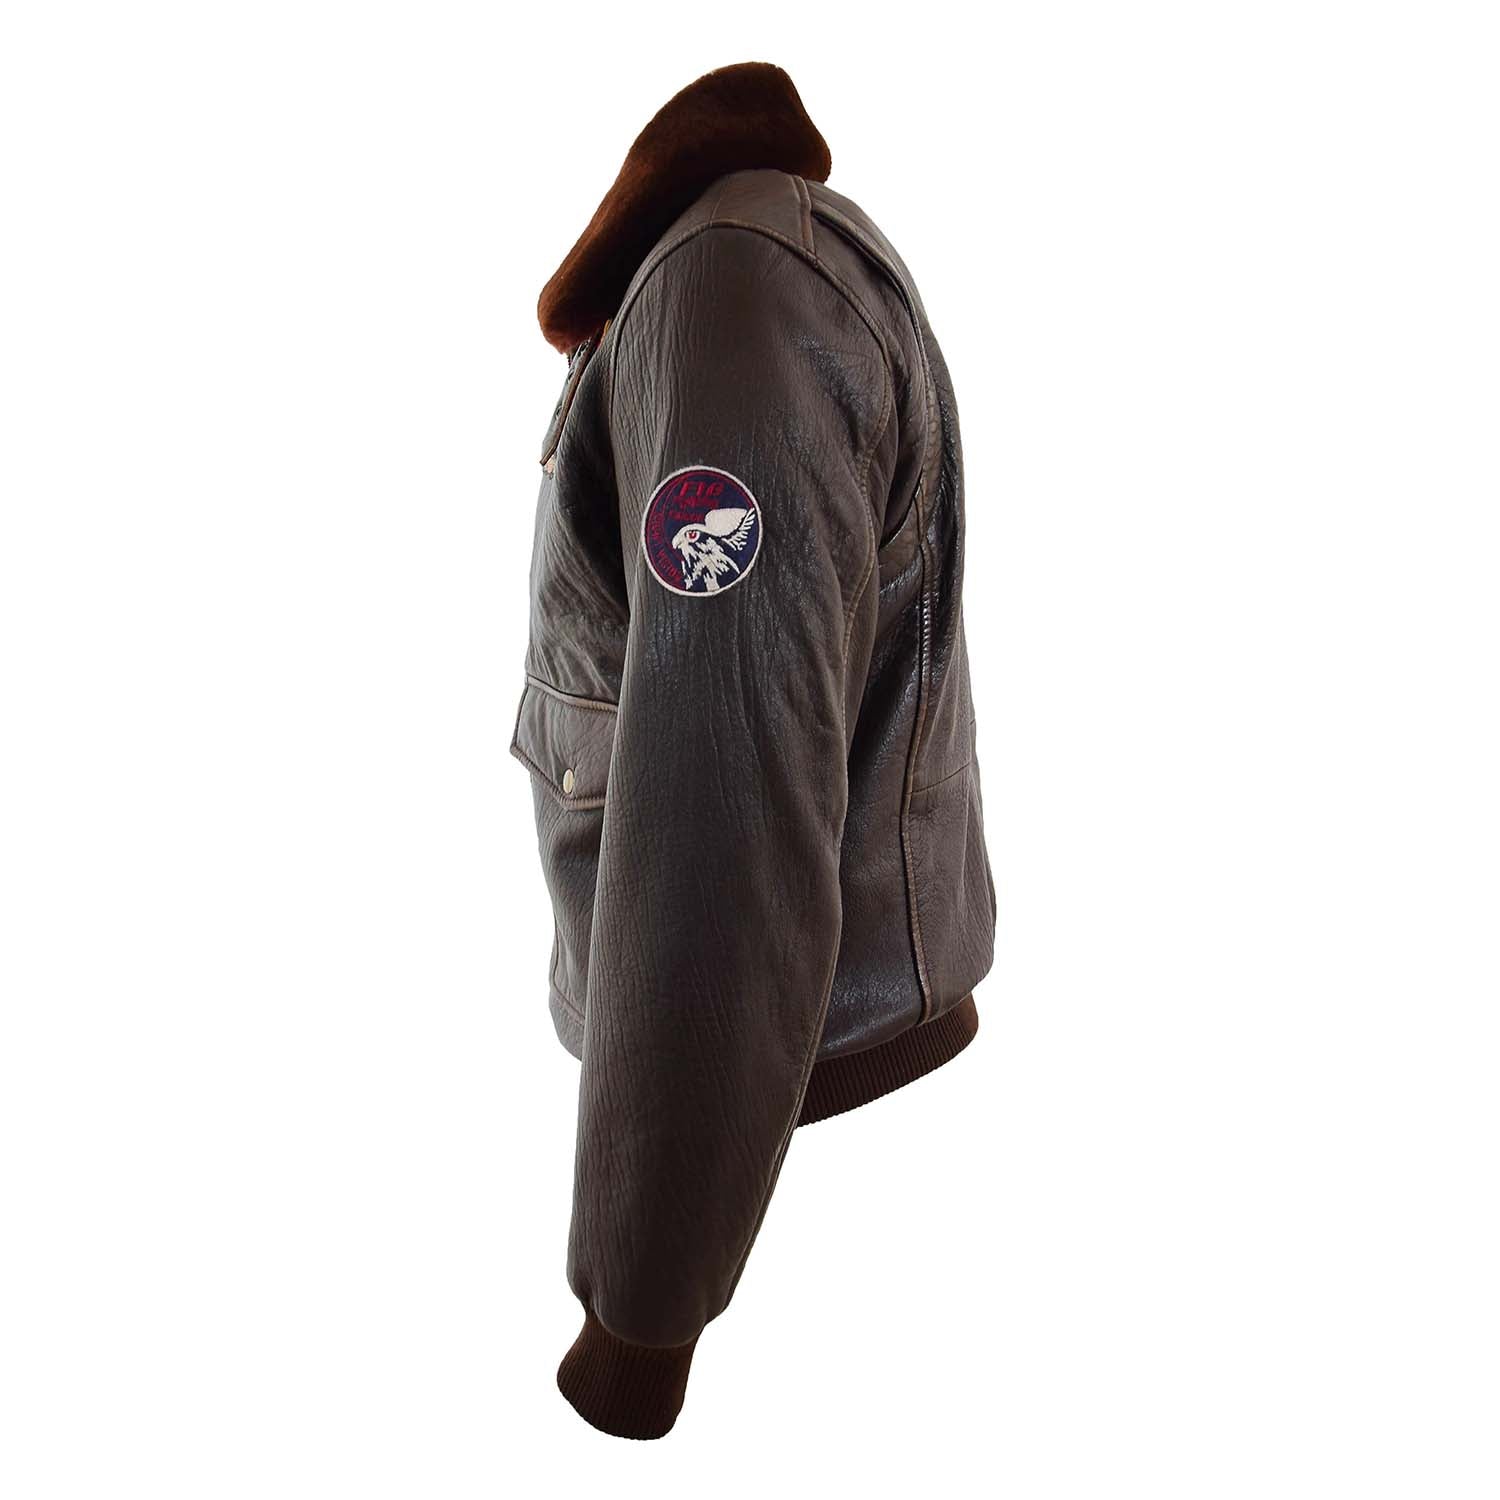 Mens Real Leather G-1 Bomber Jacket Airforce Badges FINCH Brown